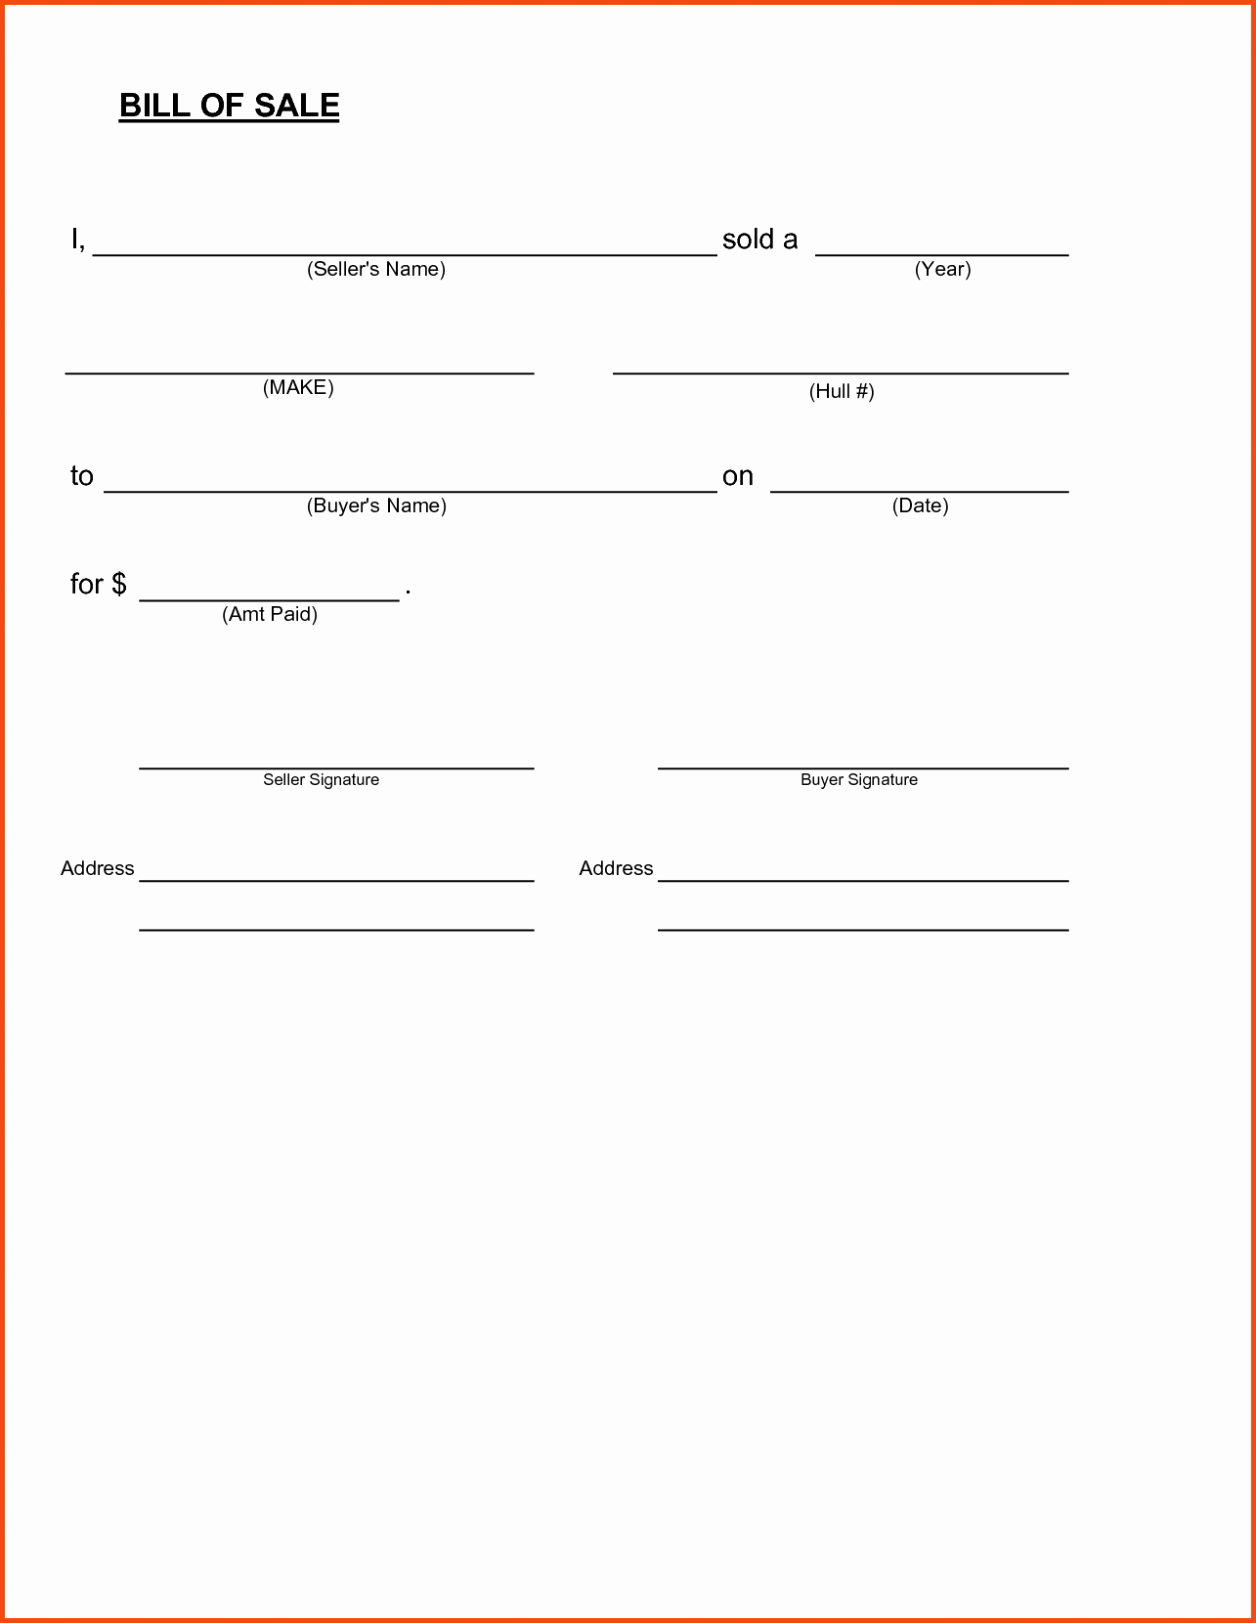 Simple Bill Of Sale Auto Awesome Sample Bill Of Sale form for Car Printable